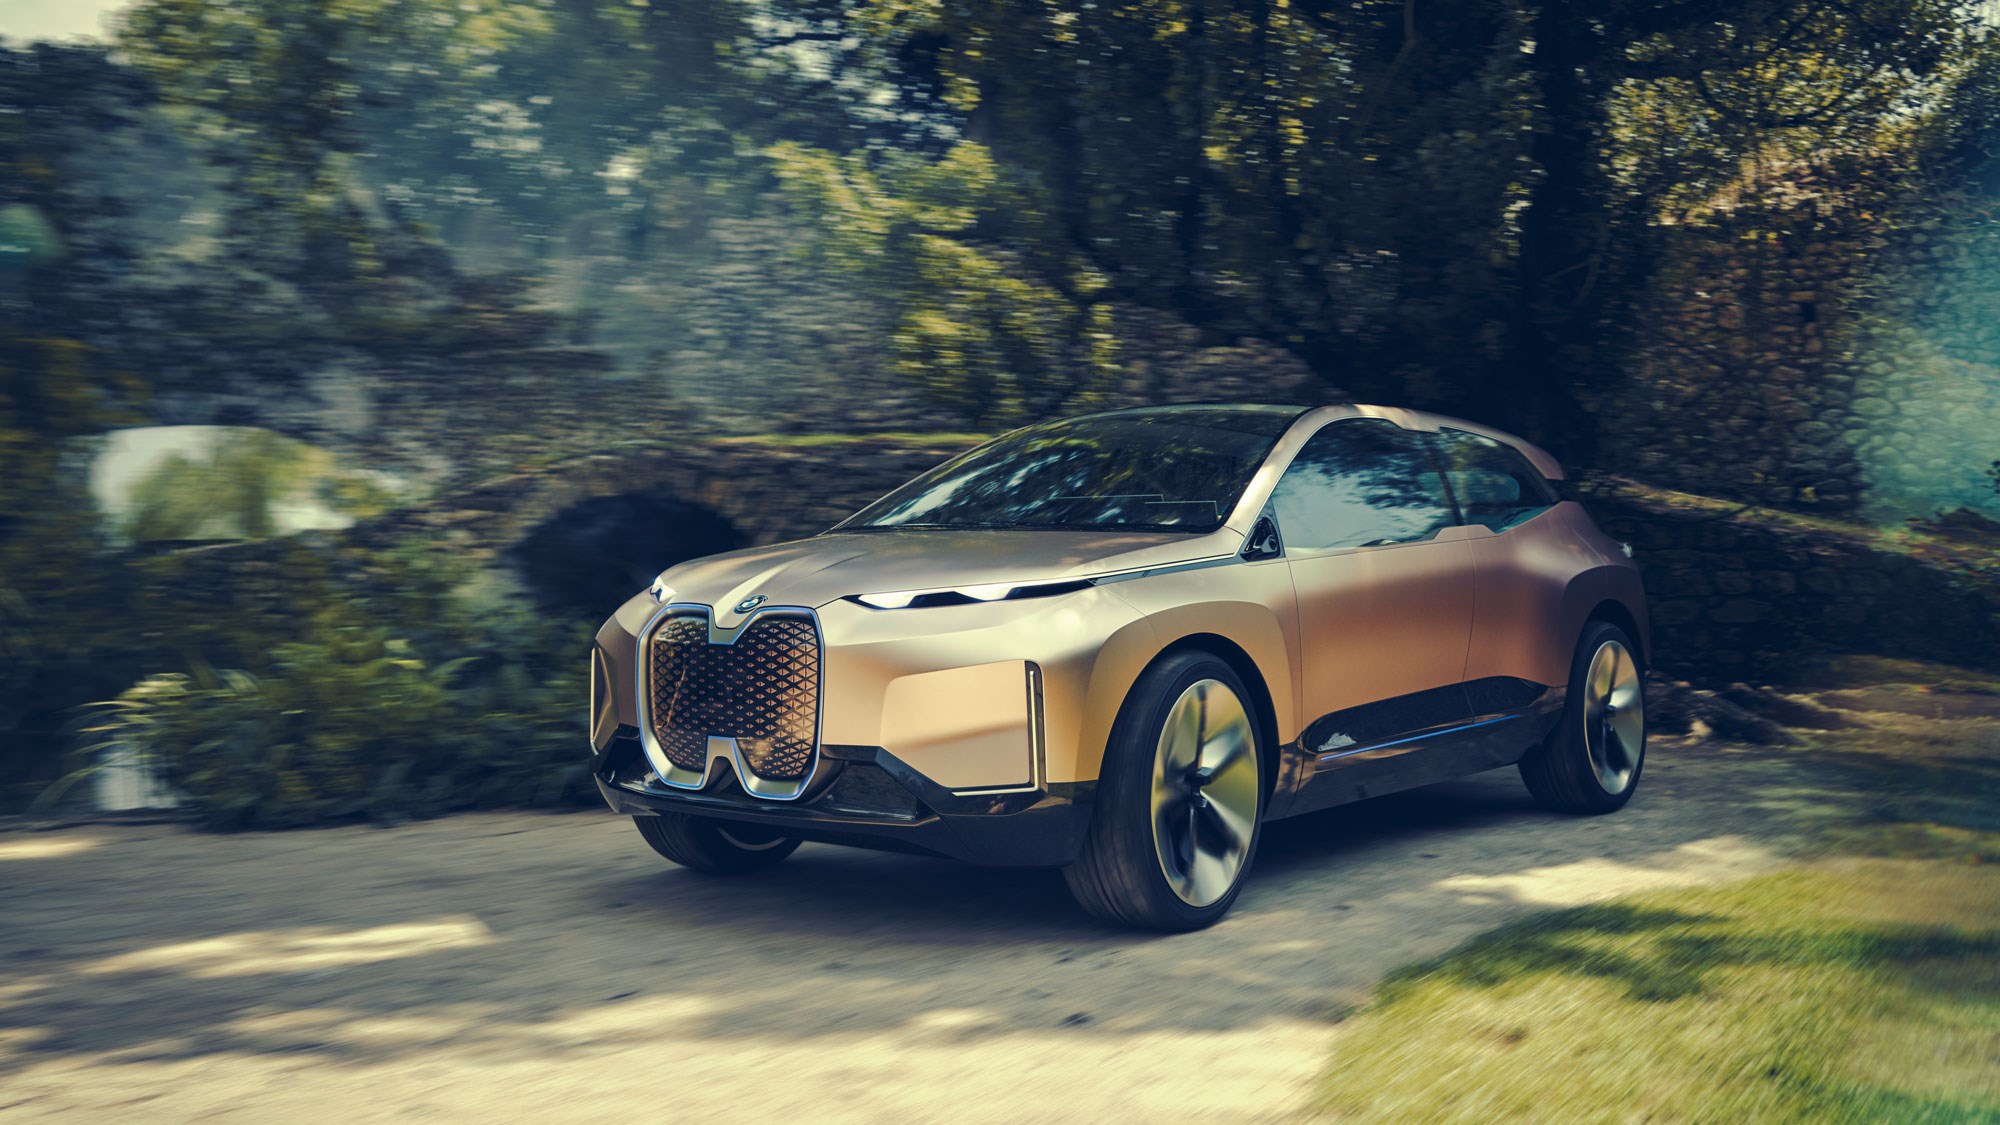 New BMW iX nearproductionready version of electric SUV previewed